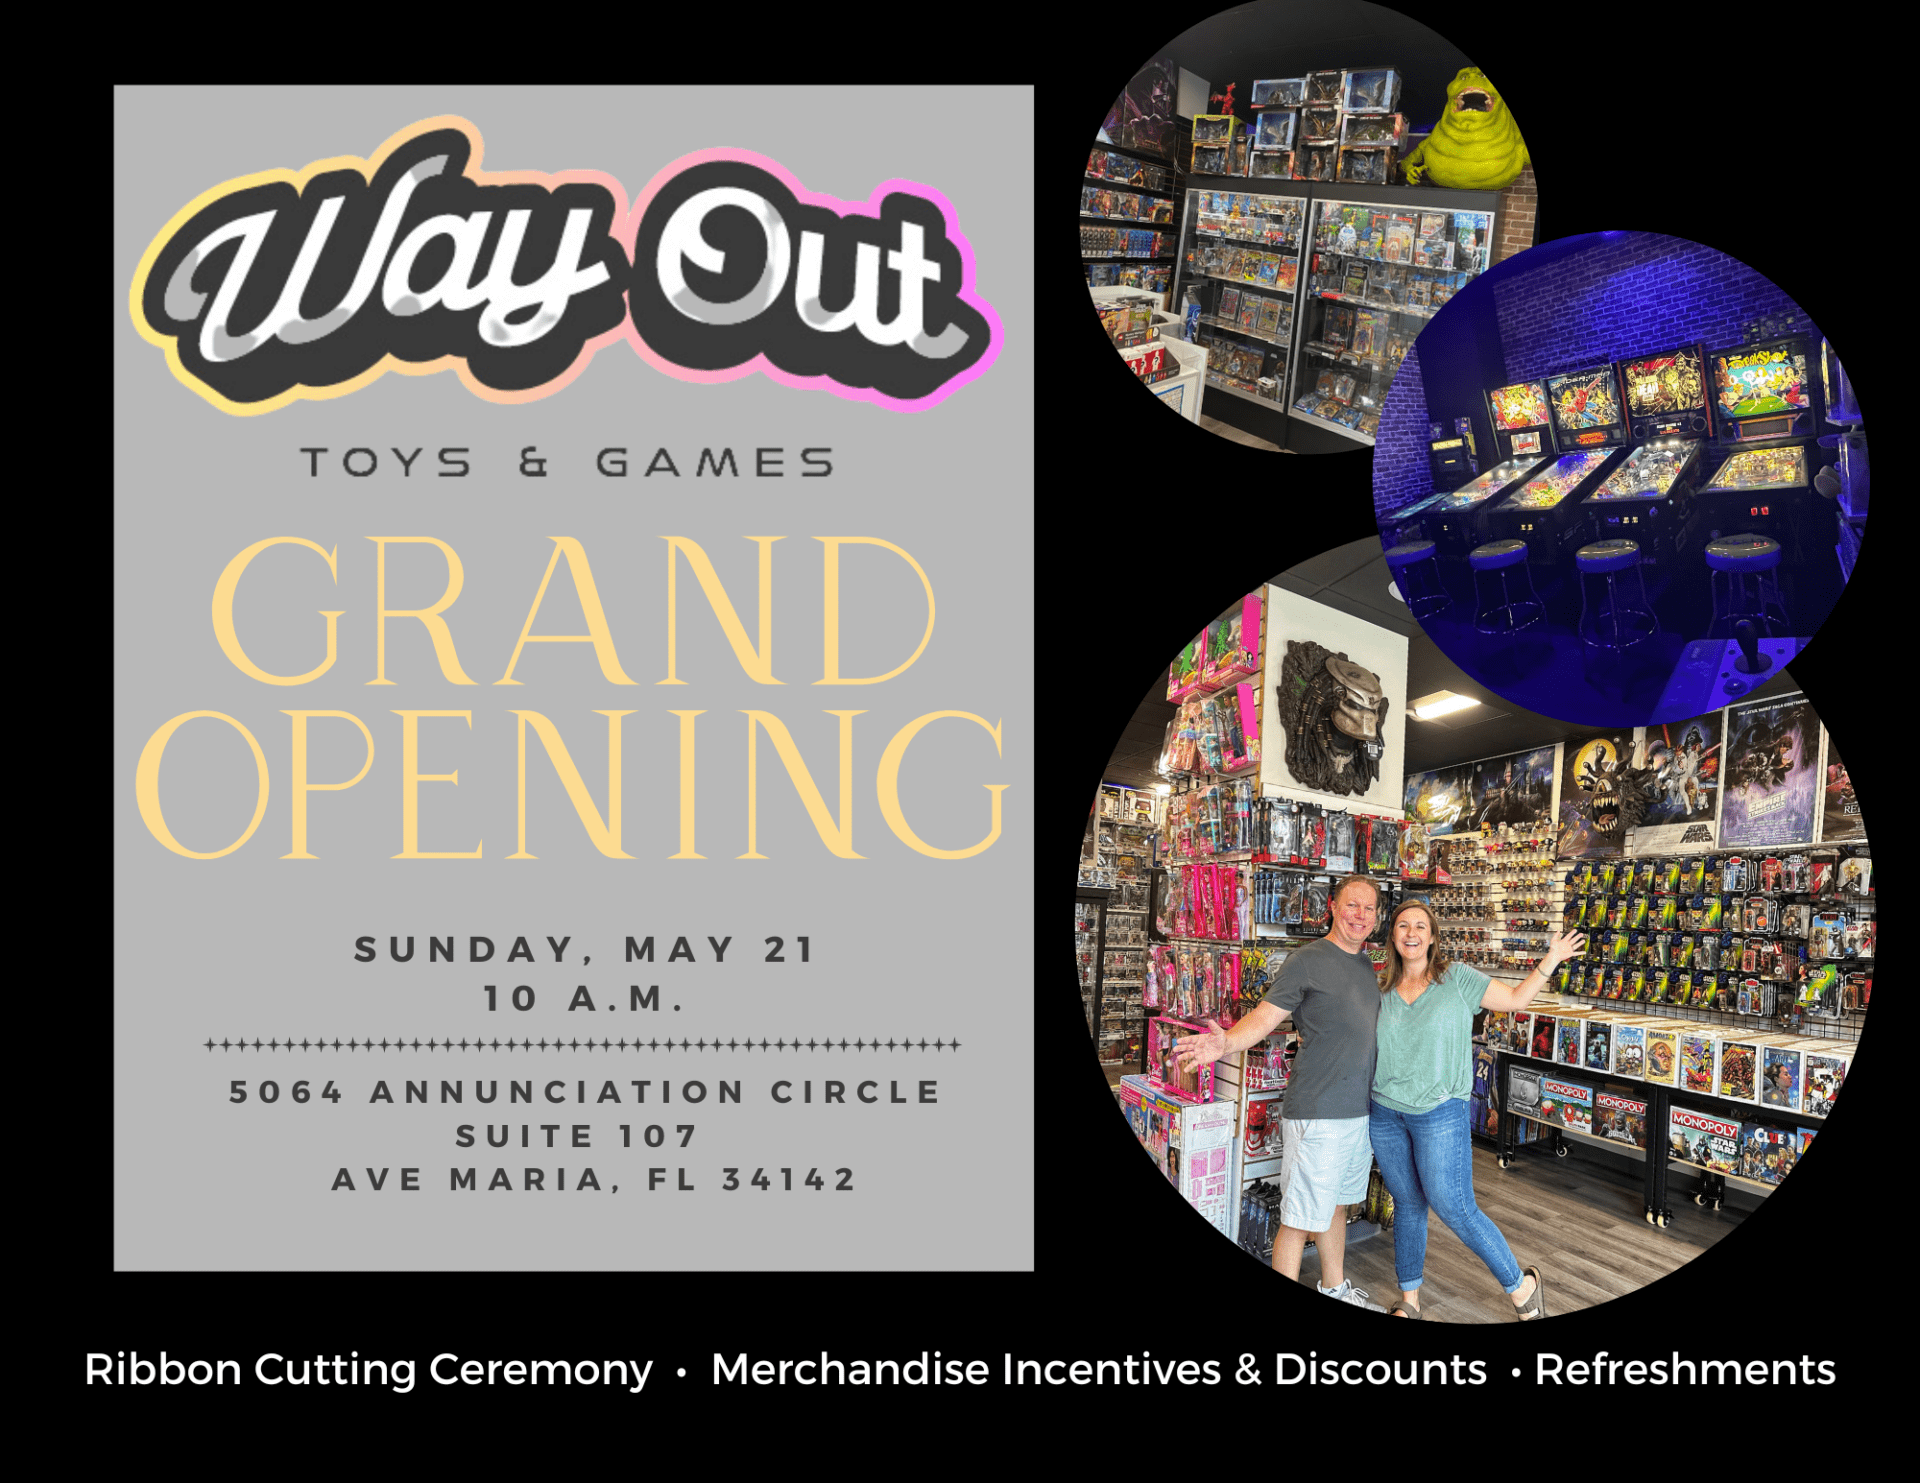 Way Out Toys & Games grand opening flyer for May 21, 2023